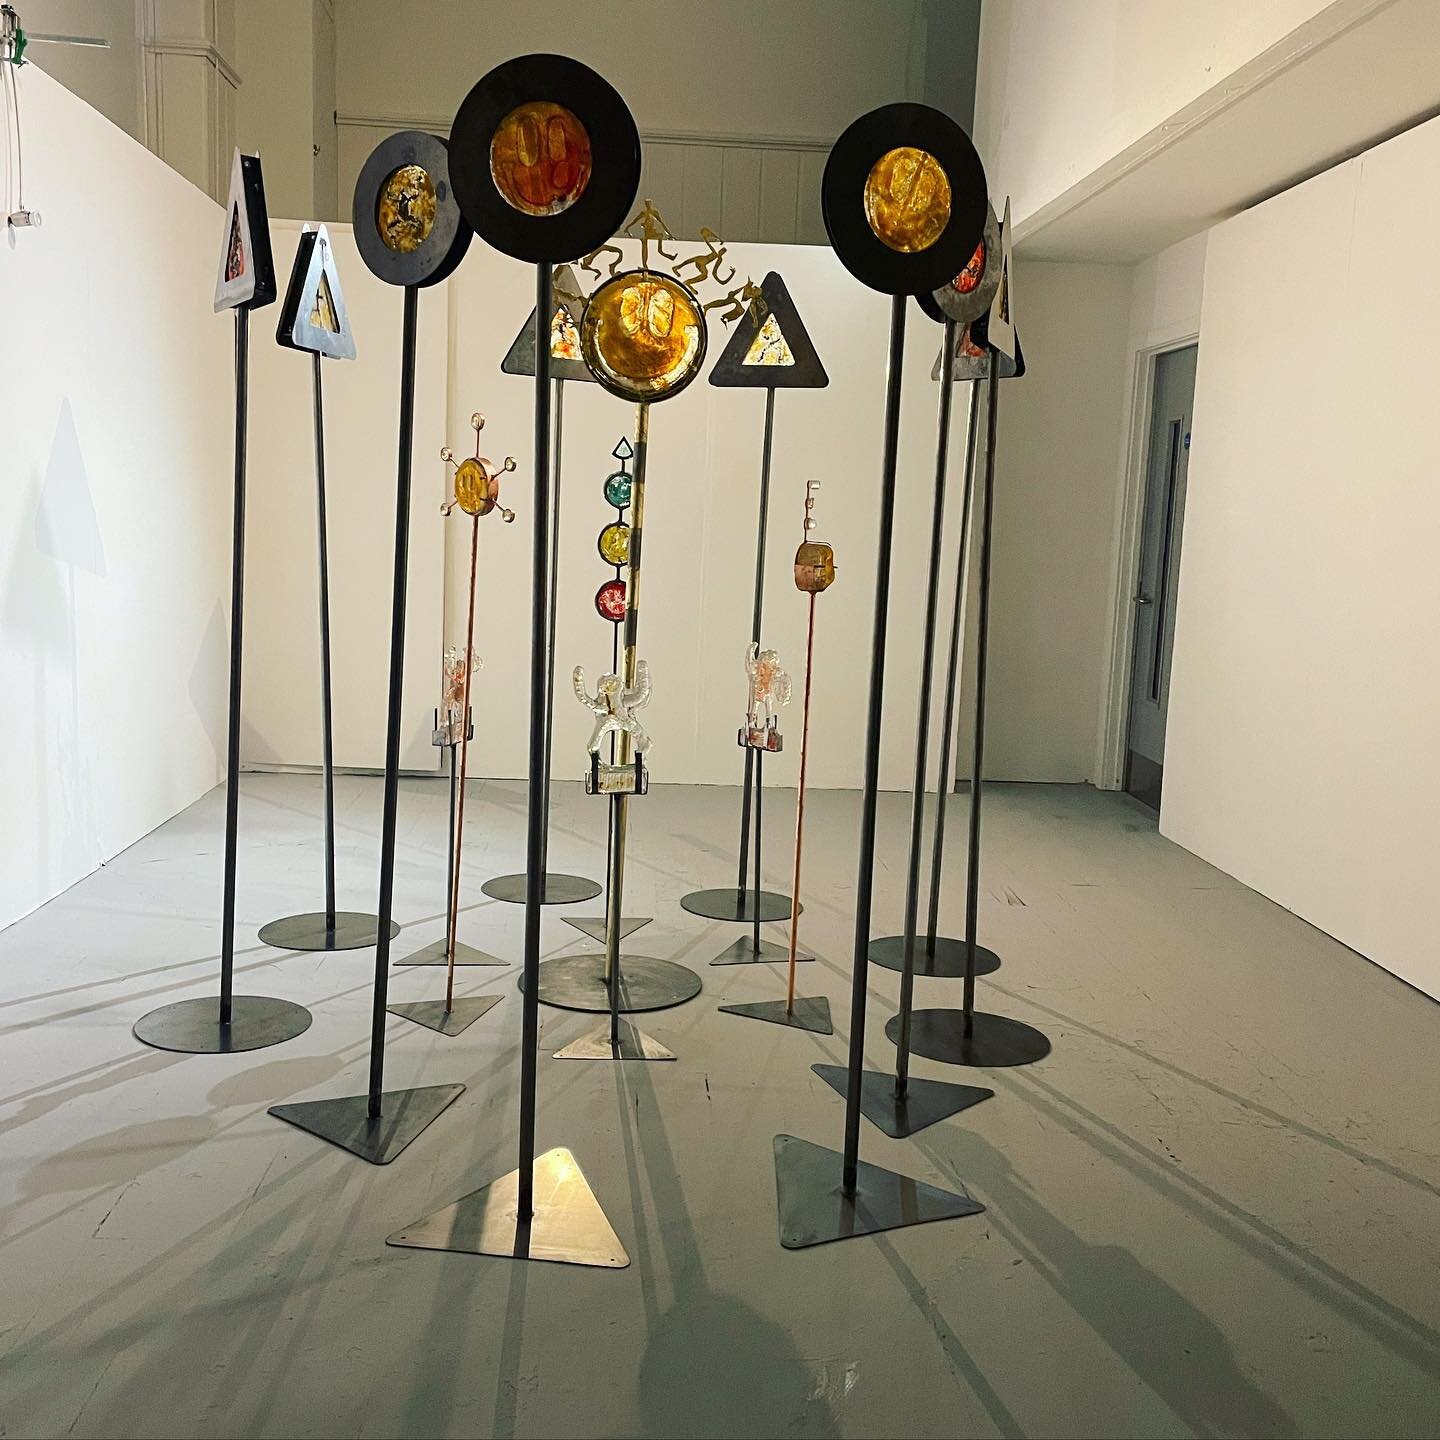 Waiting till it was dark to play with the lights @soa.gallery for my degree show. Hopefully the windows will be blacked out after the weekend so I can finalise my plan! #glass #sculpture #thearchaeologyofrave #sandcasting #triangles #circles #rituals